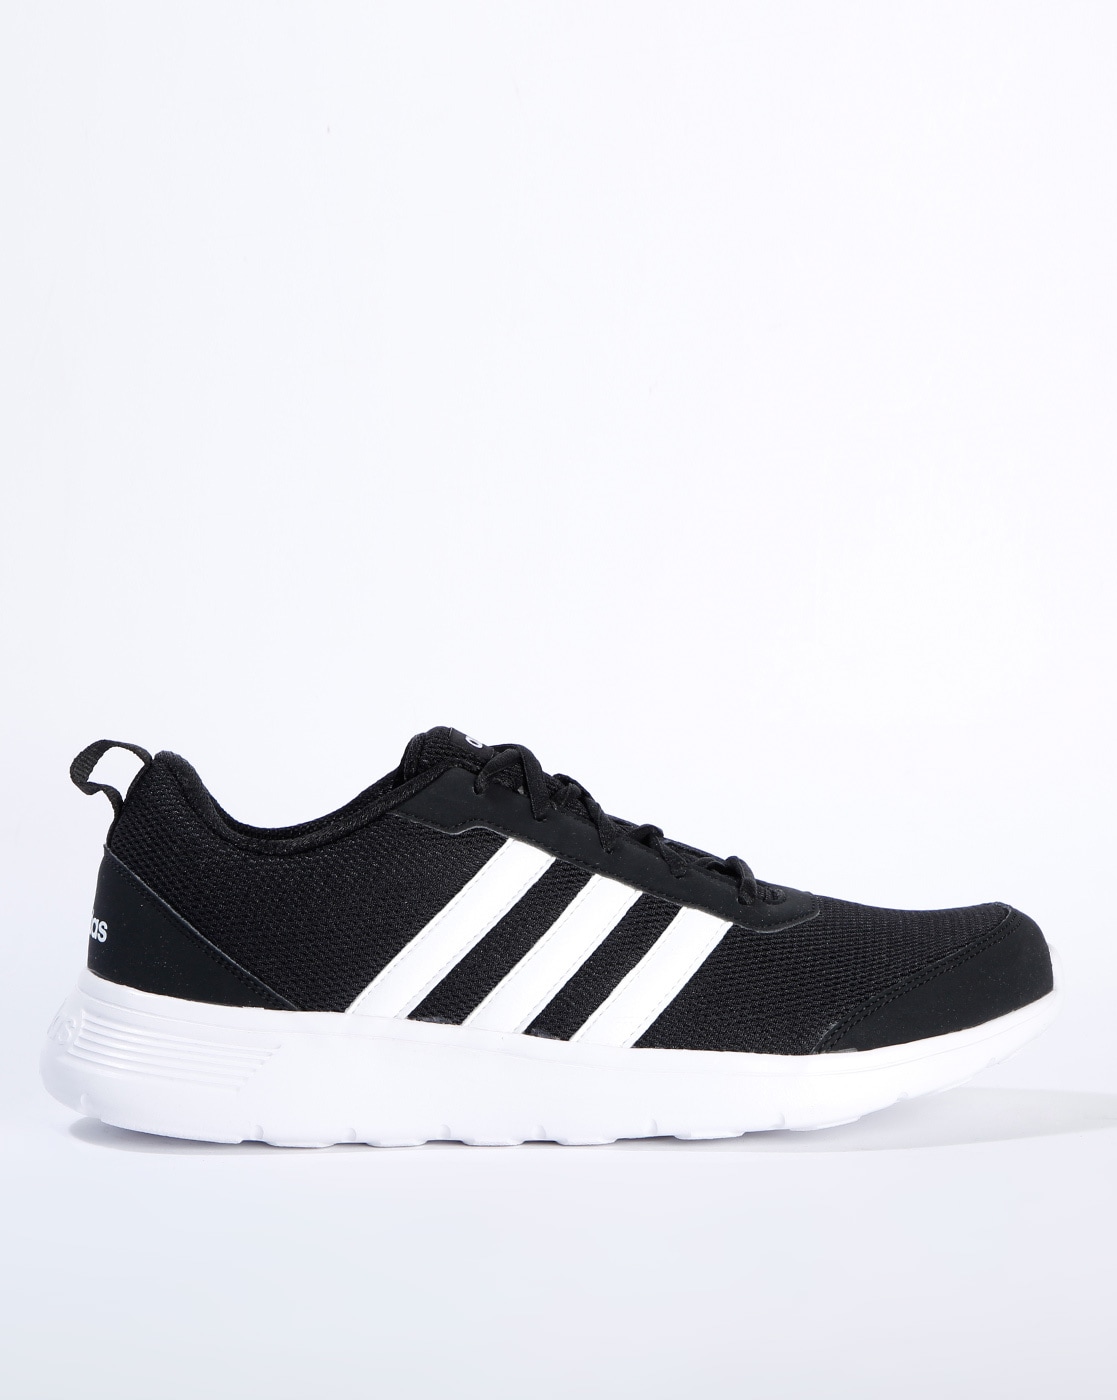 adidas sports shoes under 1500